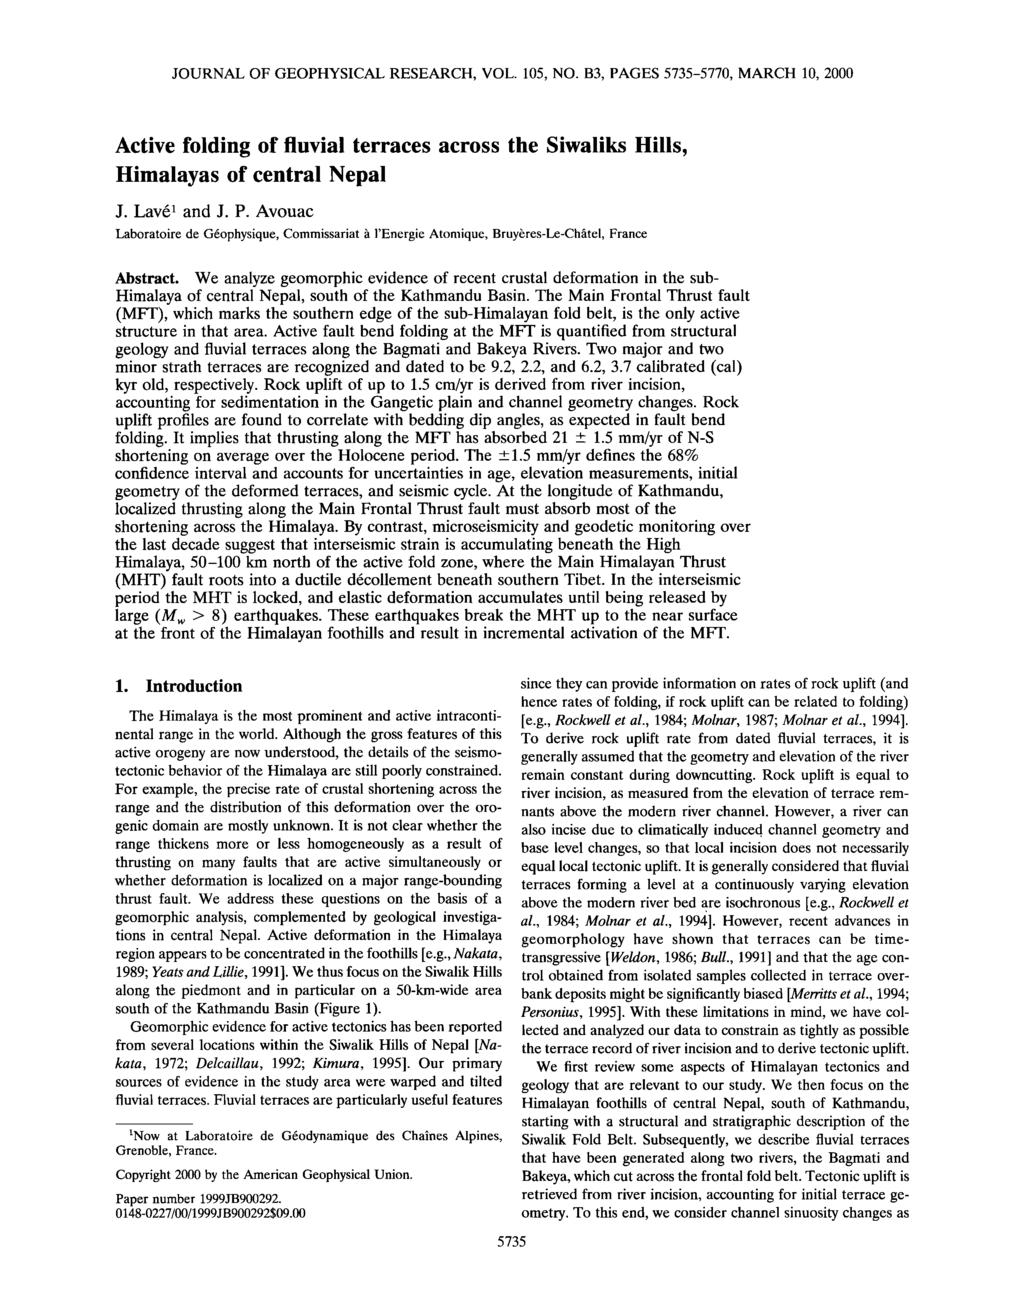 JOURNAL OF GEOPHYSICAL RESEARCH, VOL. 105, NO. B3, PAGES 5735-5770, MARCH 10, 2000 Active folding of fluvial terraces across the Siwaliks Hills, Himalayas of central Nepal J. Lav6 and J.P. Avouac Laboratoire de G6ophysique, Commissariat h l'energie Atomique, Bruy res-le-chfitel, France Abstract.